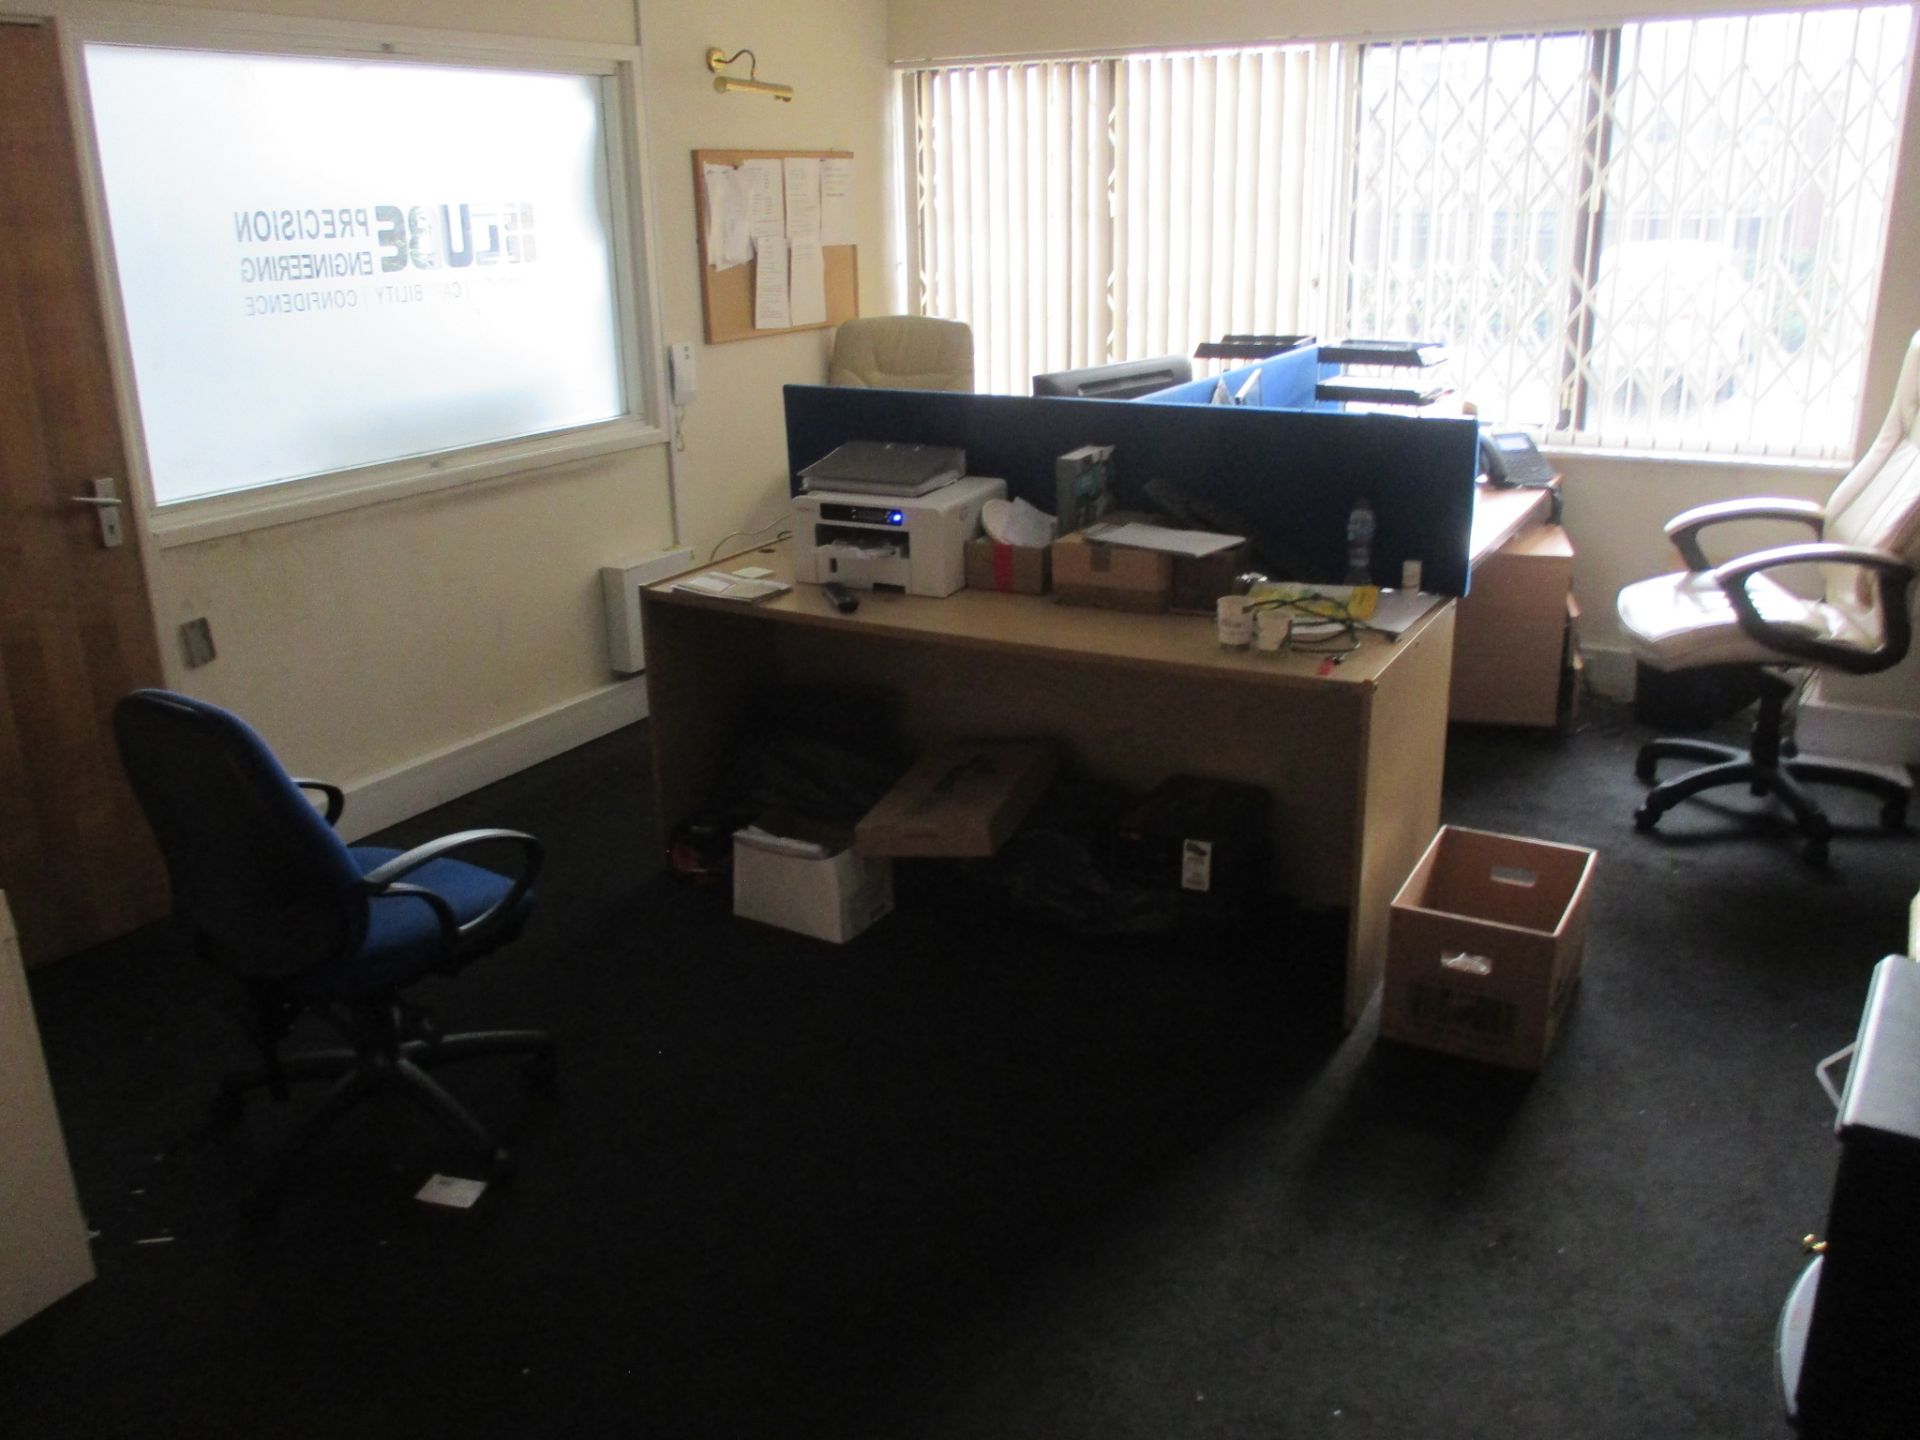 1: Contents of Accounts Office to Include Desks, Monitors, Chairs, Desktop Printer, Shredder.